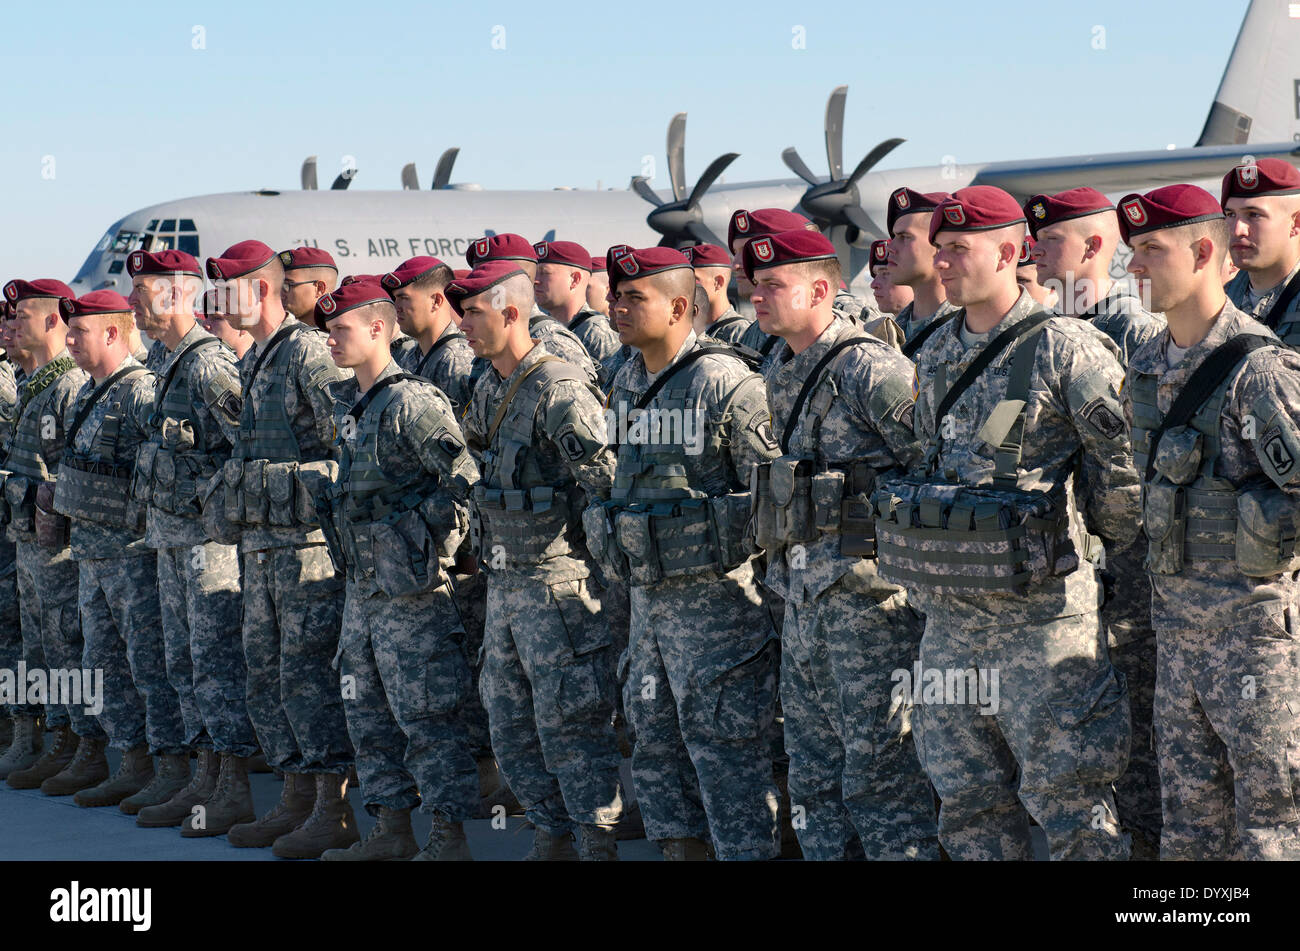 US Army paratroopers with the 173rd Airborne Brigade Combat Team stand in formation after arriving April 26, 2014 in Siauliai, Lithuania. The soldiers were deployed to Lithuania, Poland, Latvia and Estonia as tensions with Russia rise over Ukraine. Stock Photo